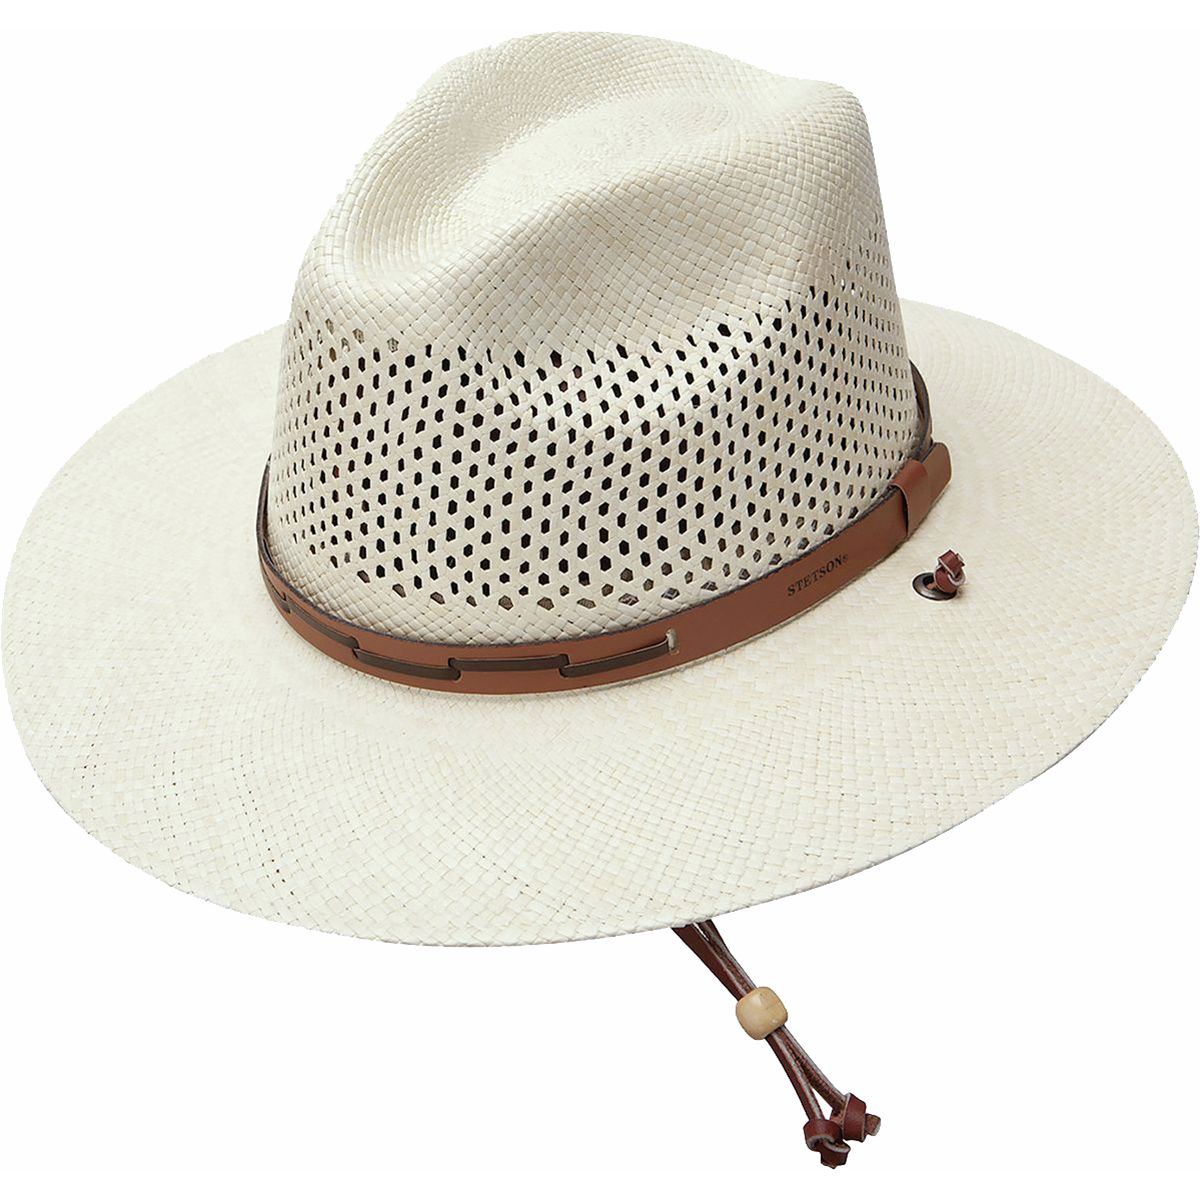 цена Панама-сафари airway Stetson, цвет natural